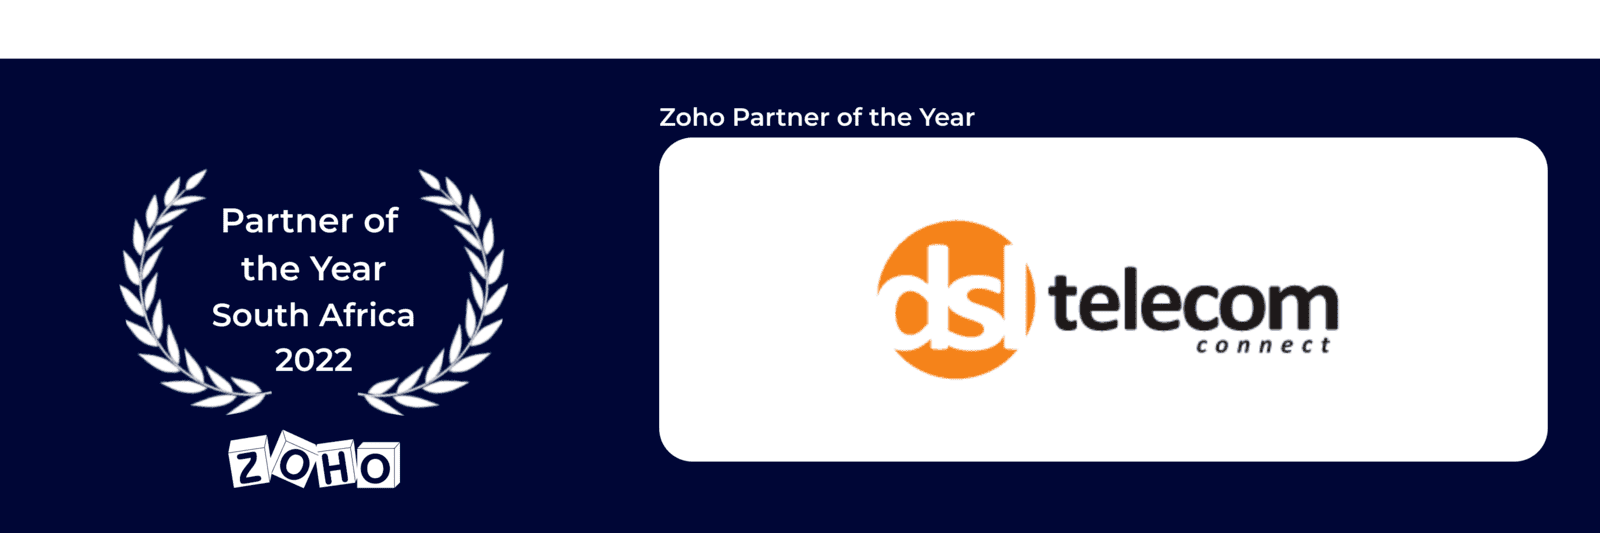 DSL Telecom awarded with Zoho Partner of the Year South Africa 2022